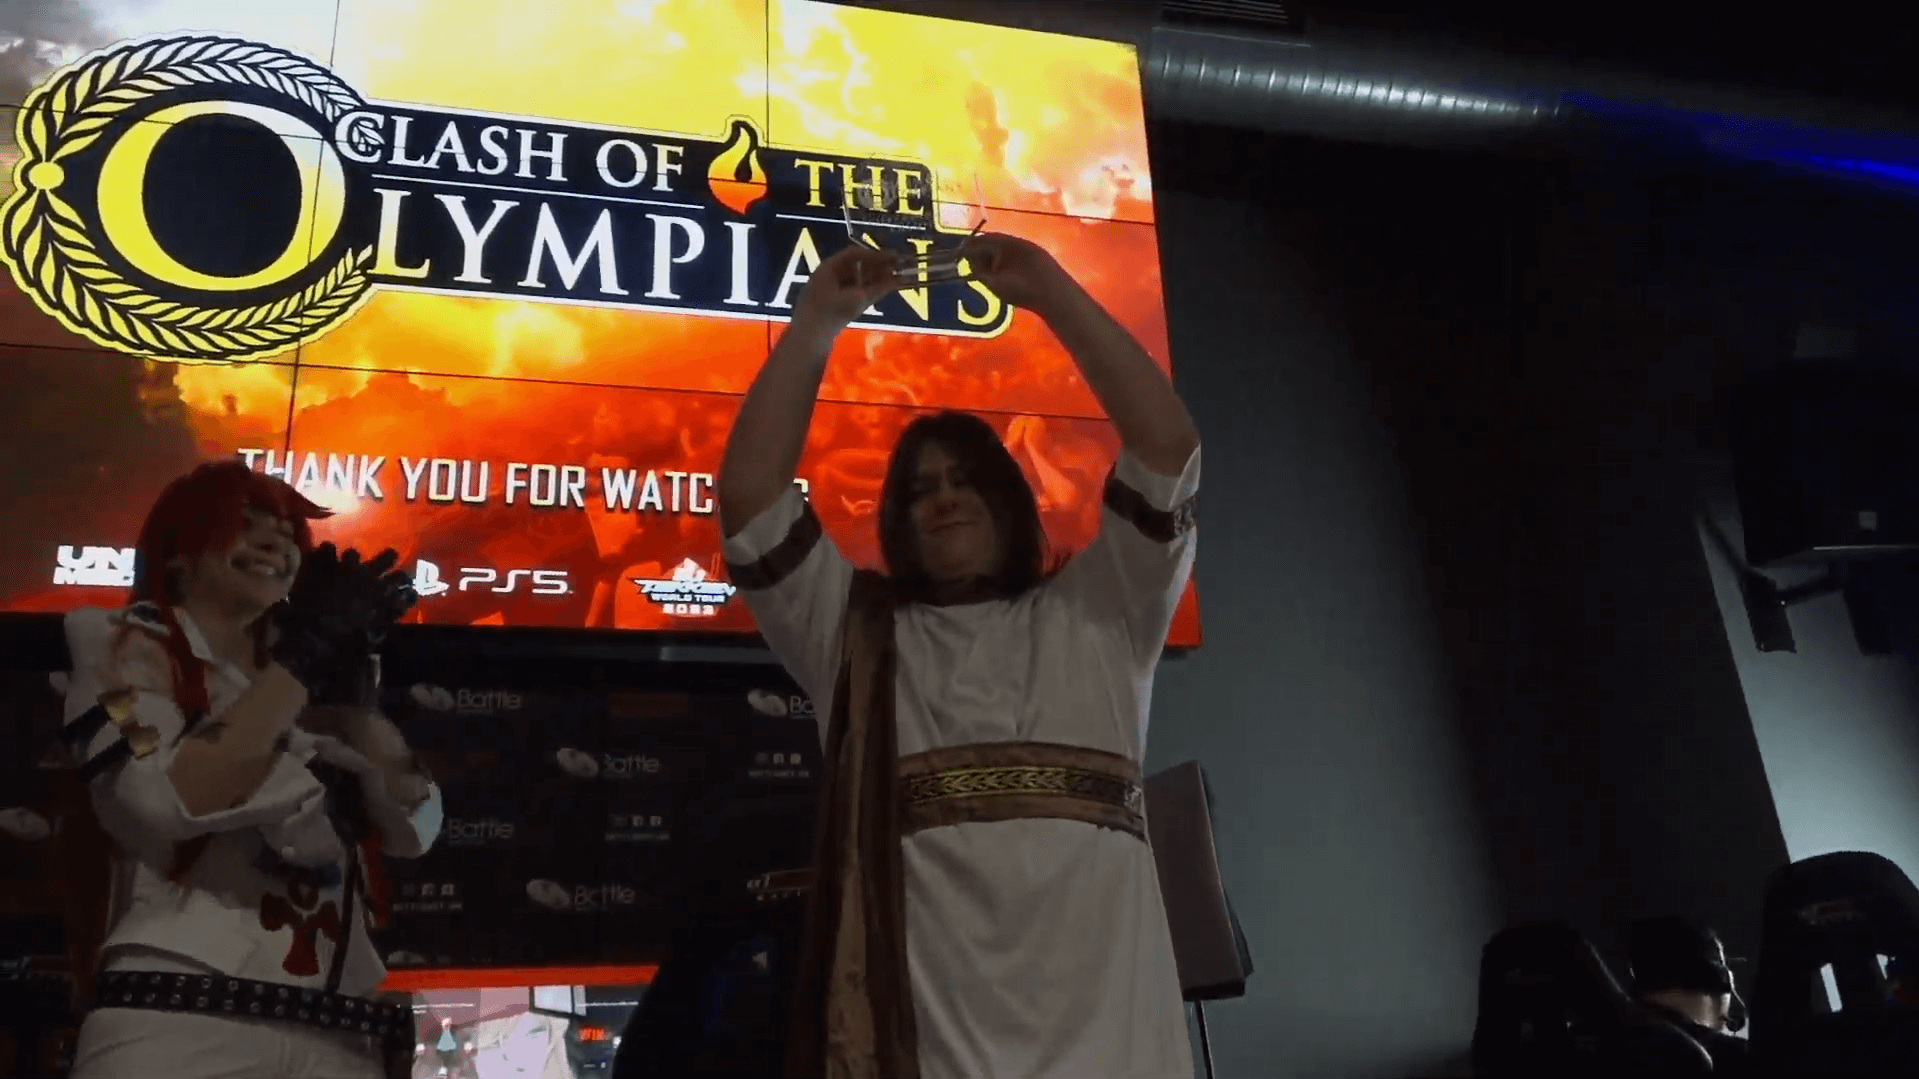 Clash of the Olympians 2k23: Guilty Gear -STRIVE- Results